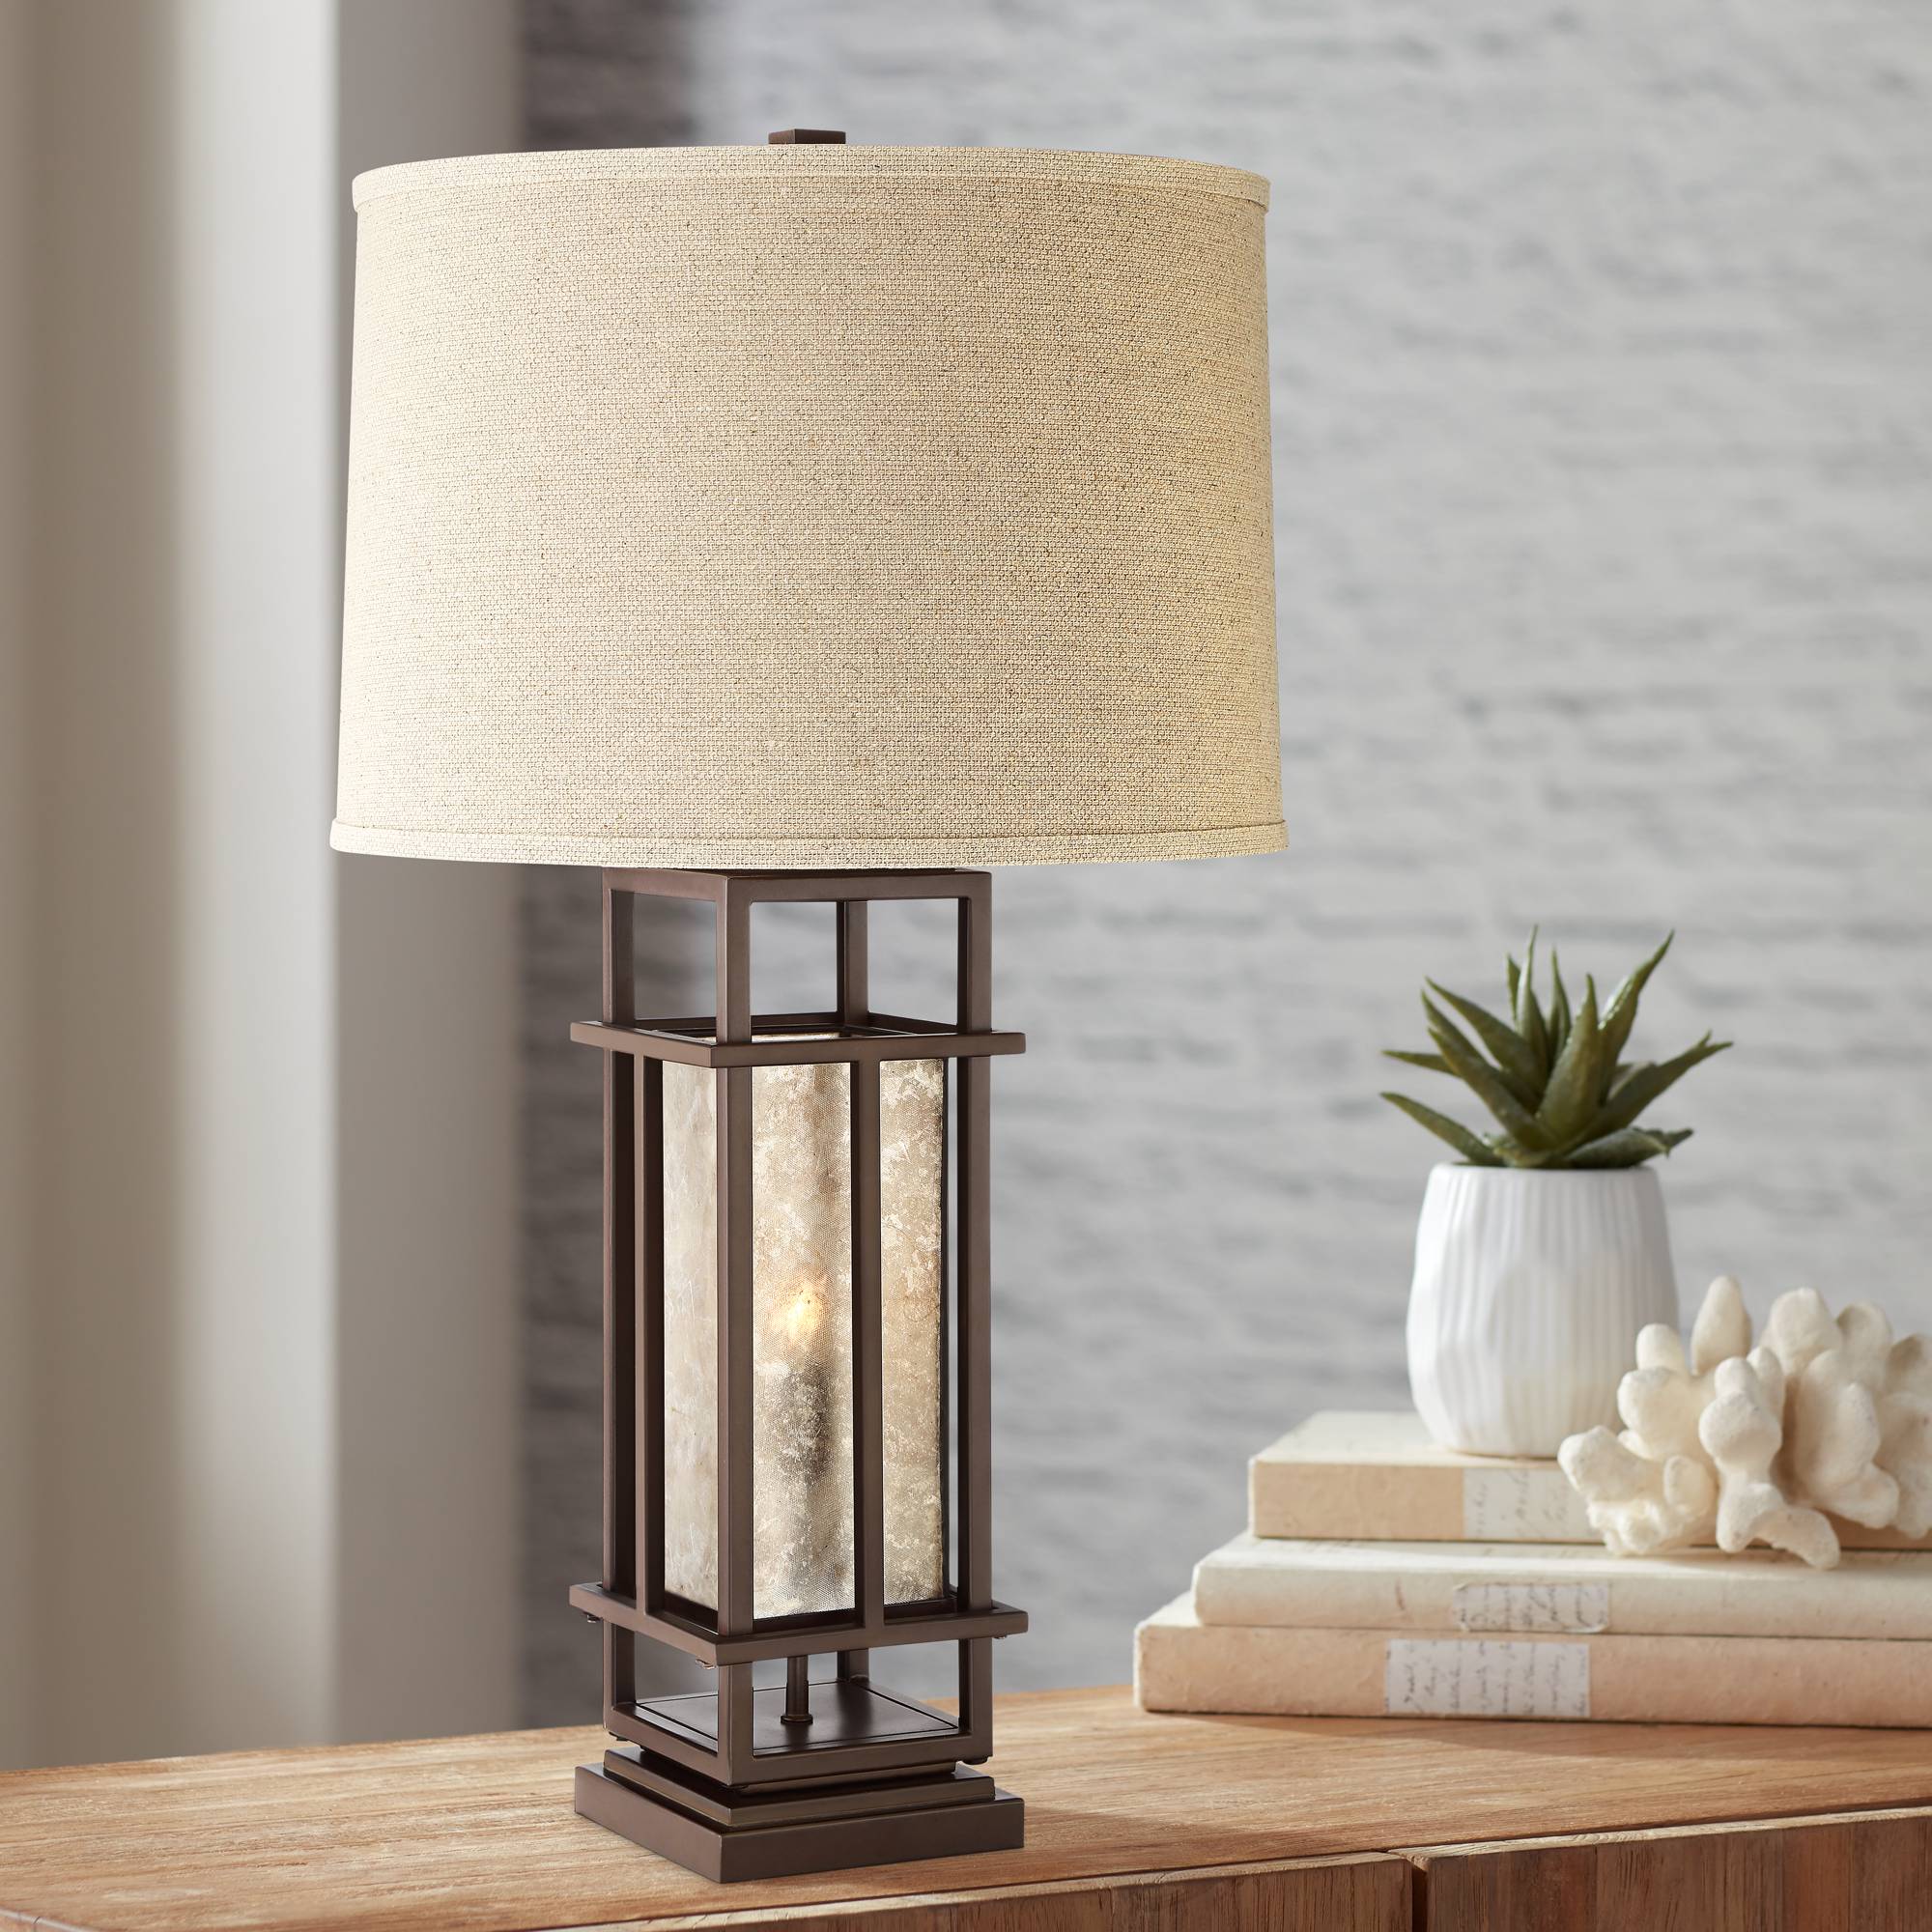 Details About Rustic Farmhouse Table Lamp With Nightlight Led Caged Brown Living Room Bedroom